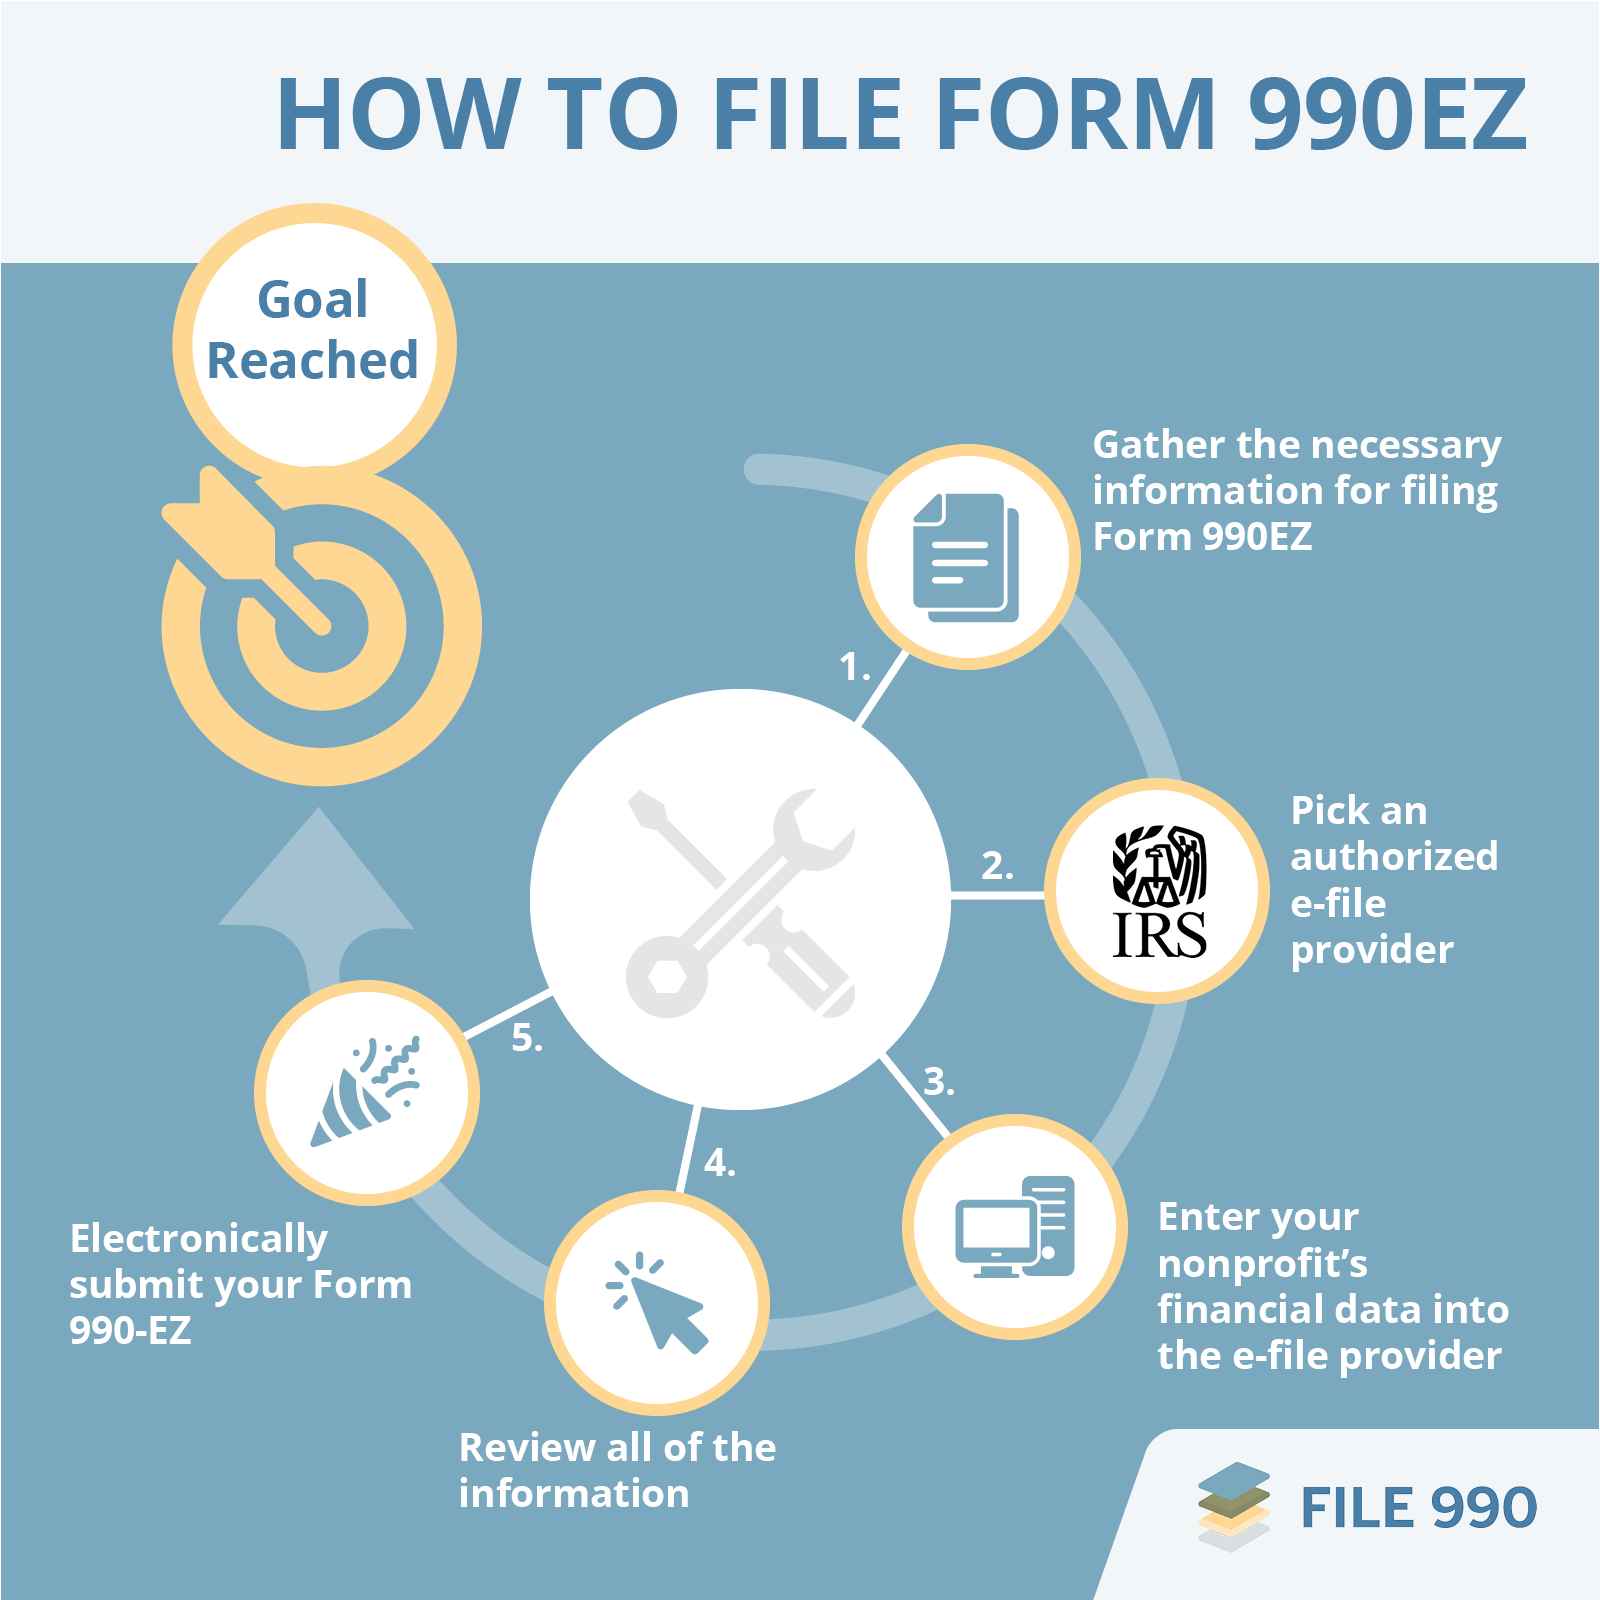 A graphic explaining the steps for filing Form 990EZ for nonprofits, as explained below.